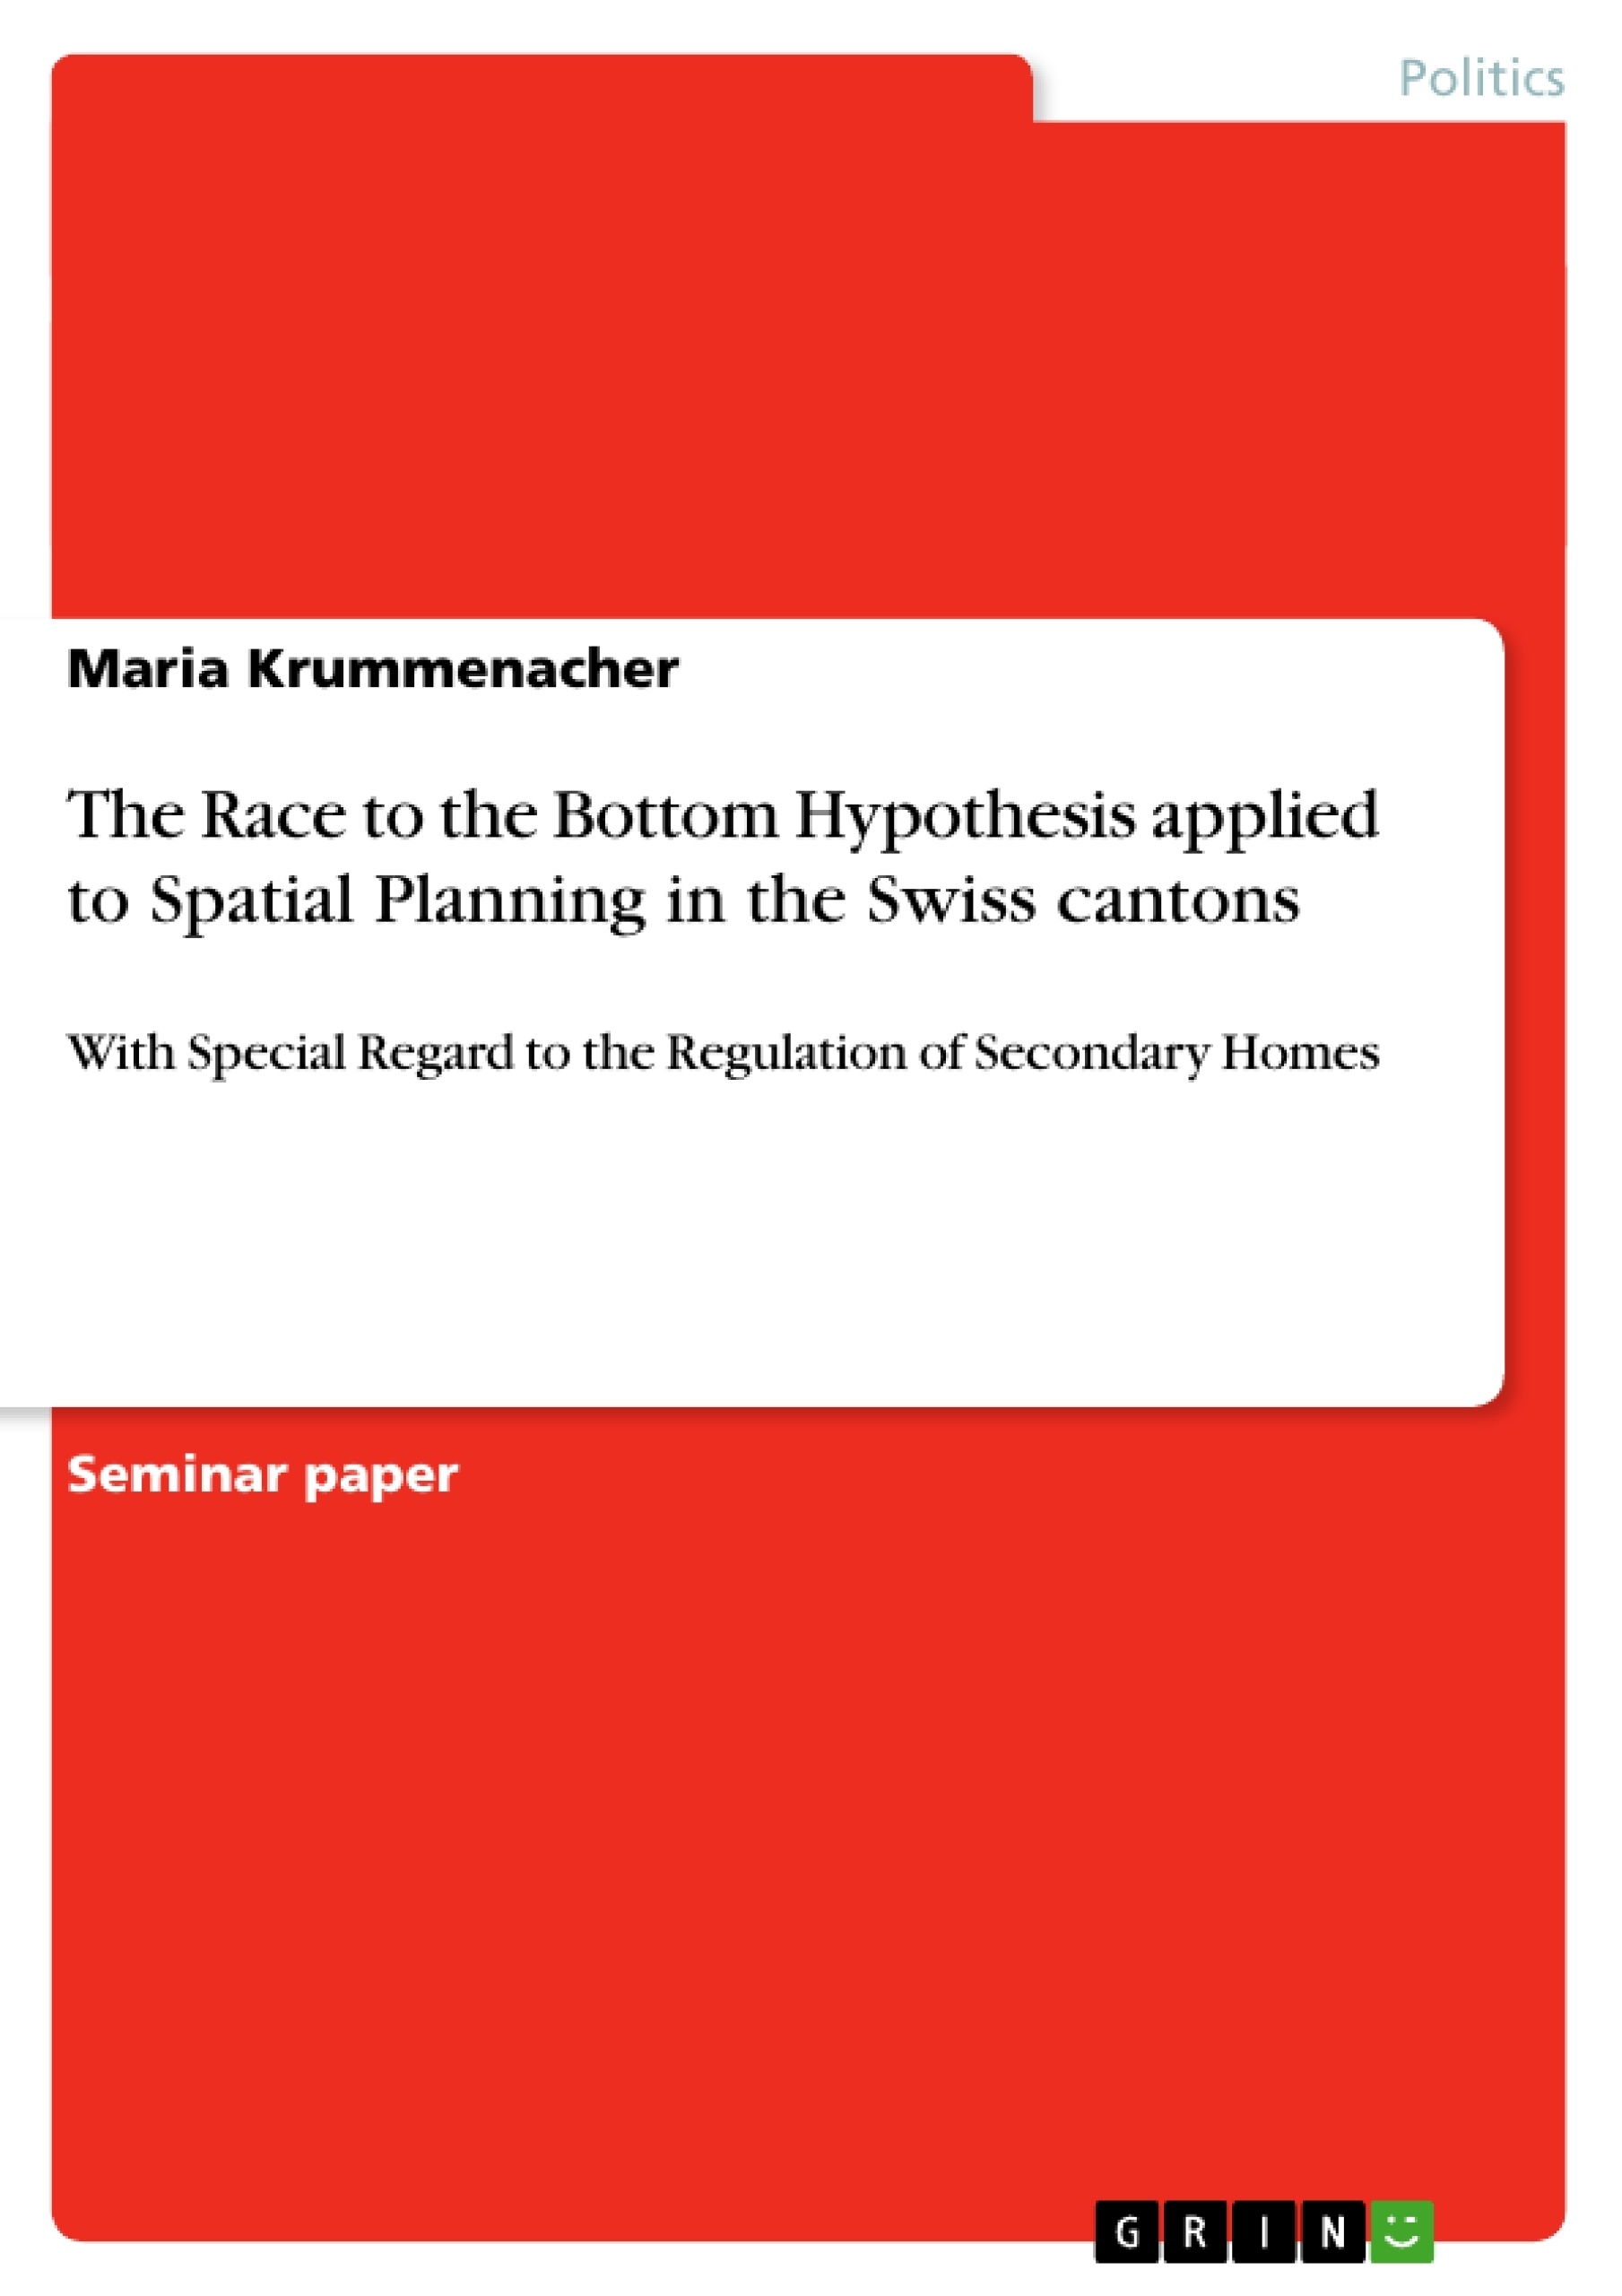 Title: The Race to the Bottom Hypothesis applied to Spatial Planning in the Swiss cantons